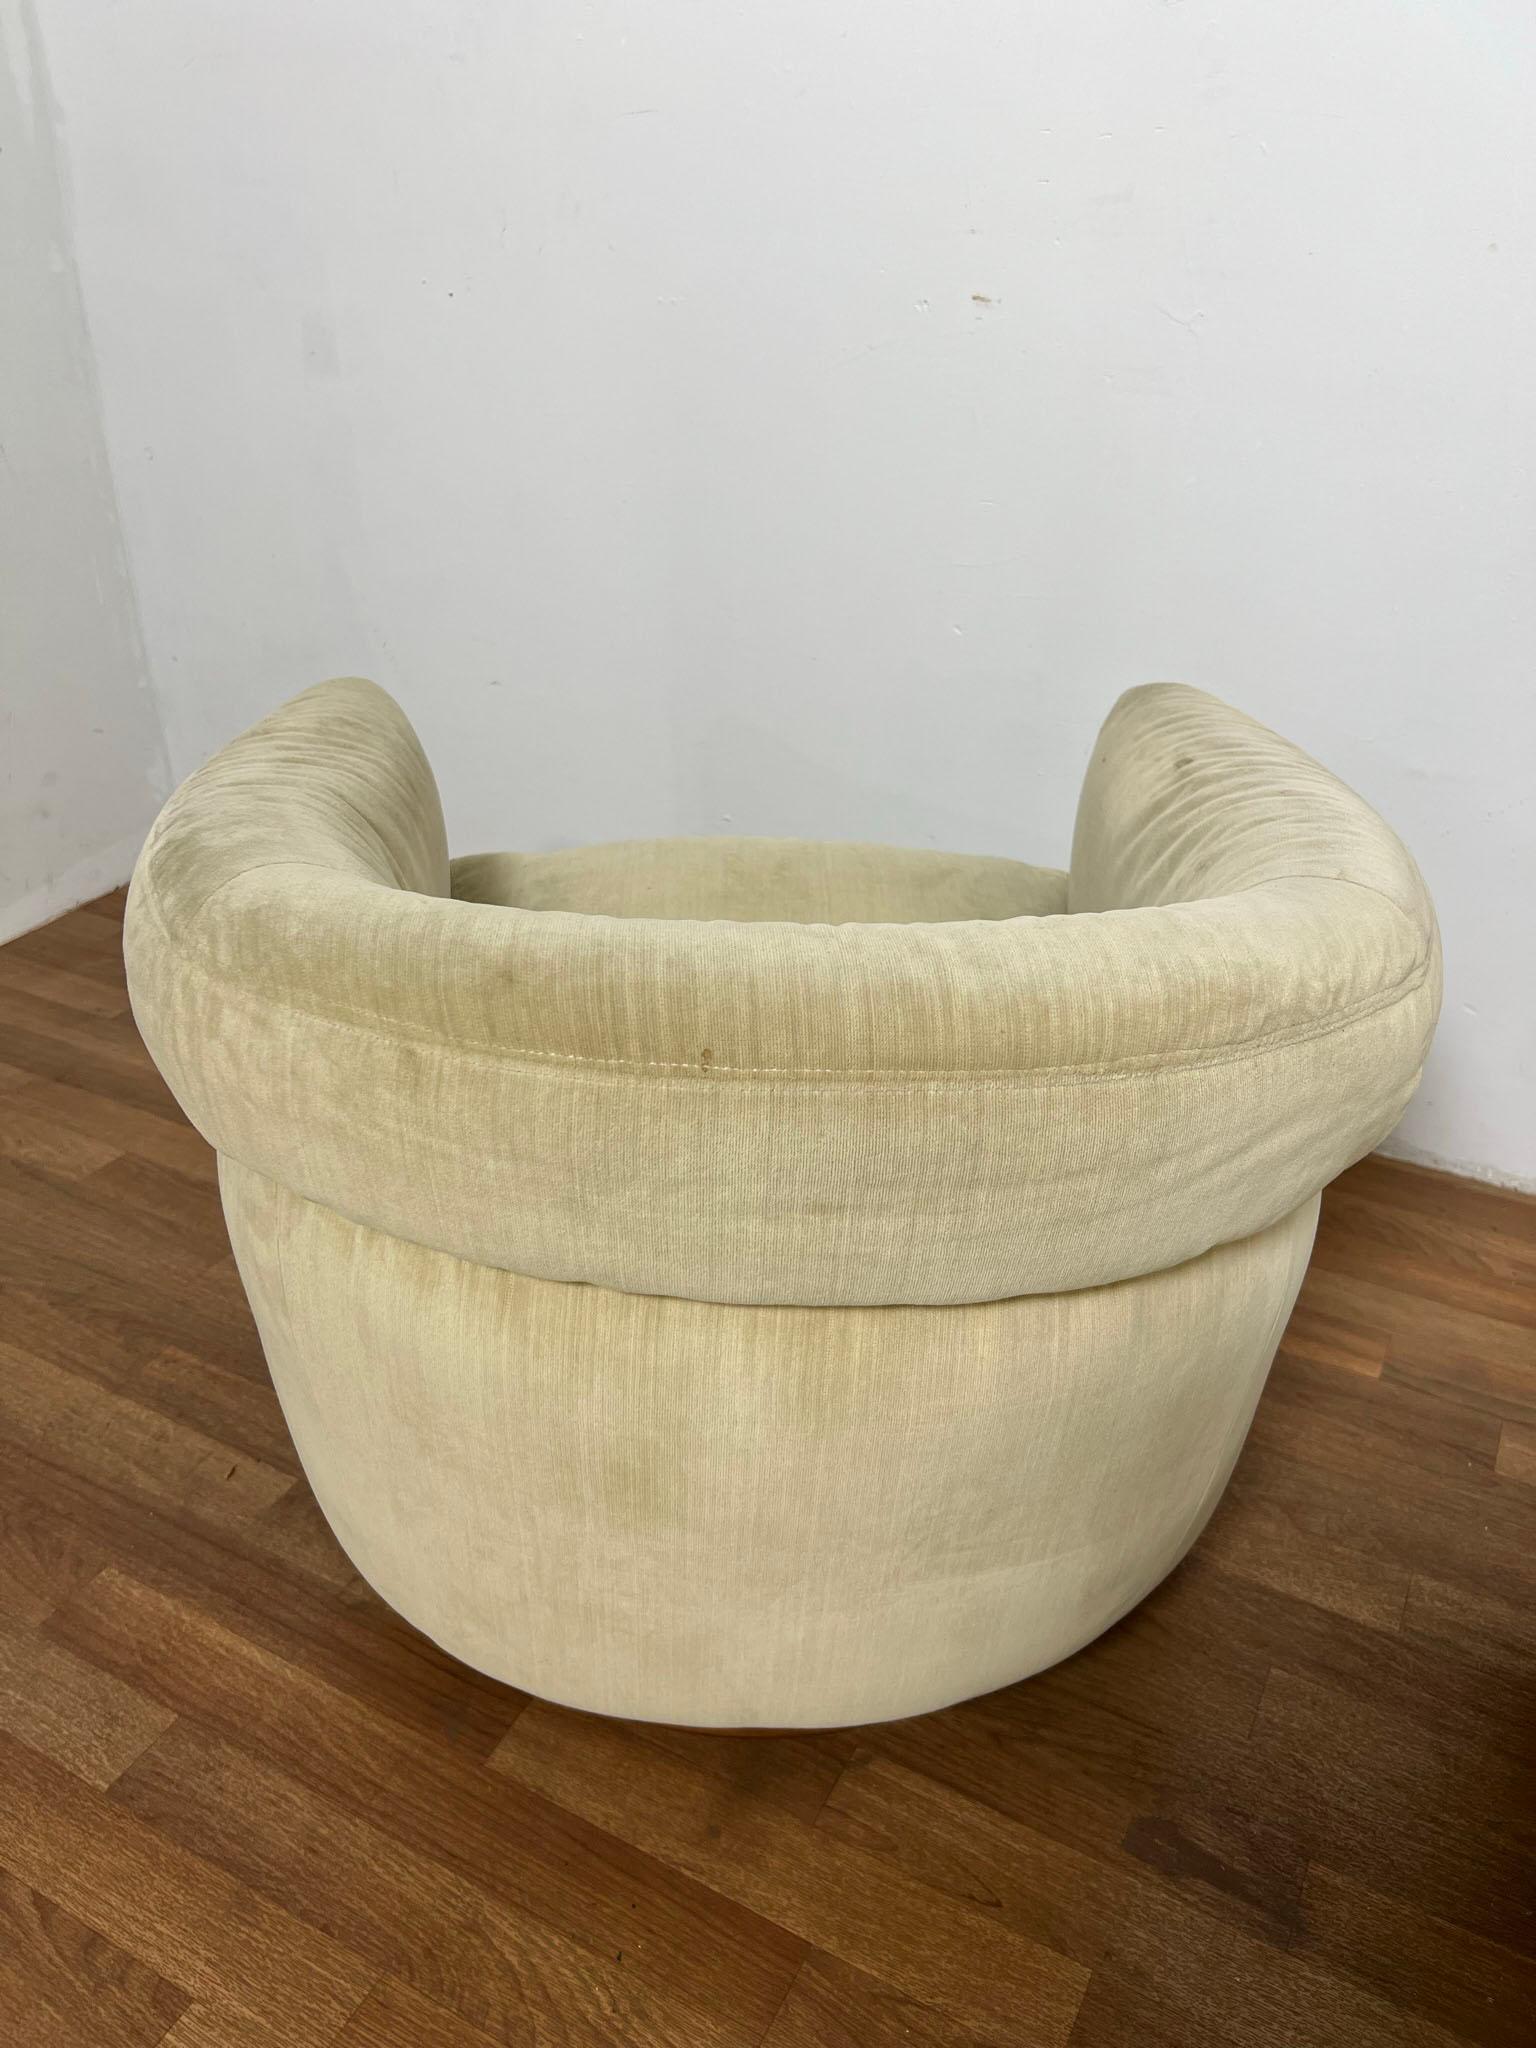 Late 20th Century Pair of Milo Baughman for Thayer Coggin Swivel Tub Chairs Ca. 1970s For Sale